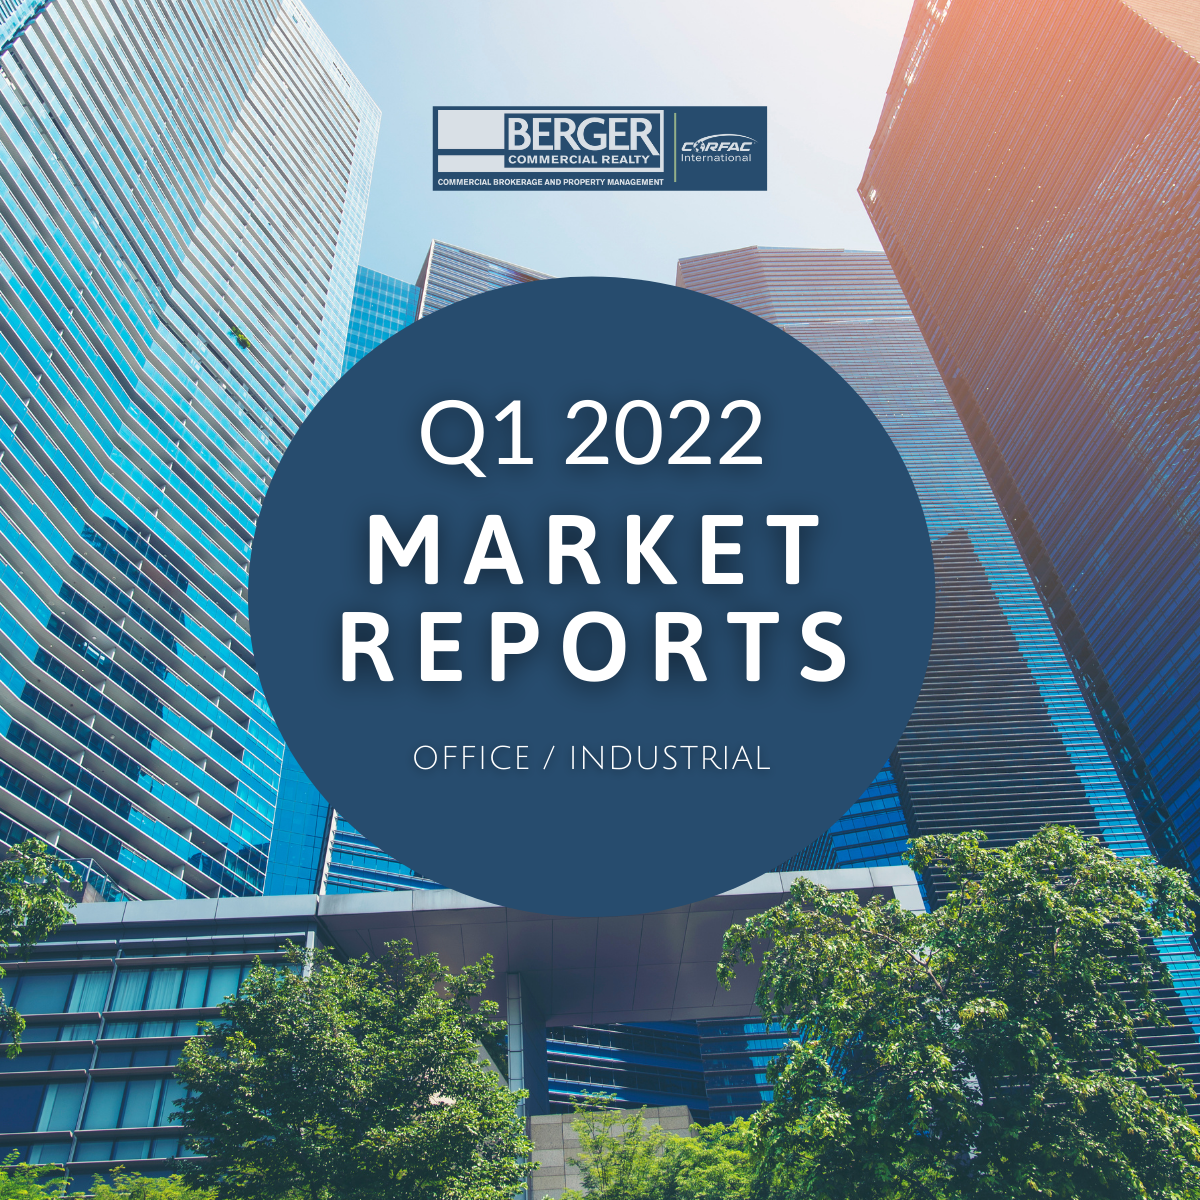 We Are Pleased To Provide You With This Copy Of Berger Commercial Realty’s Q1 2022 Market Reports